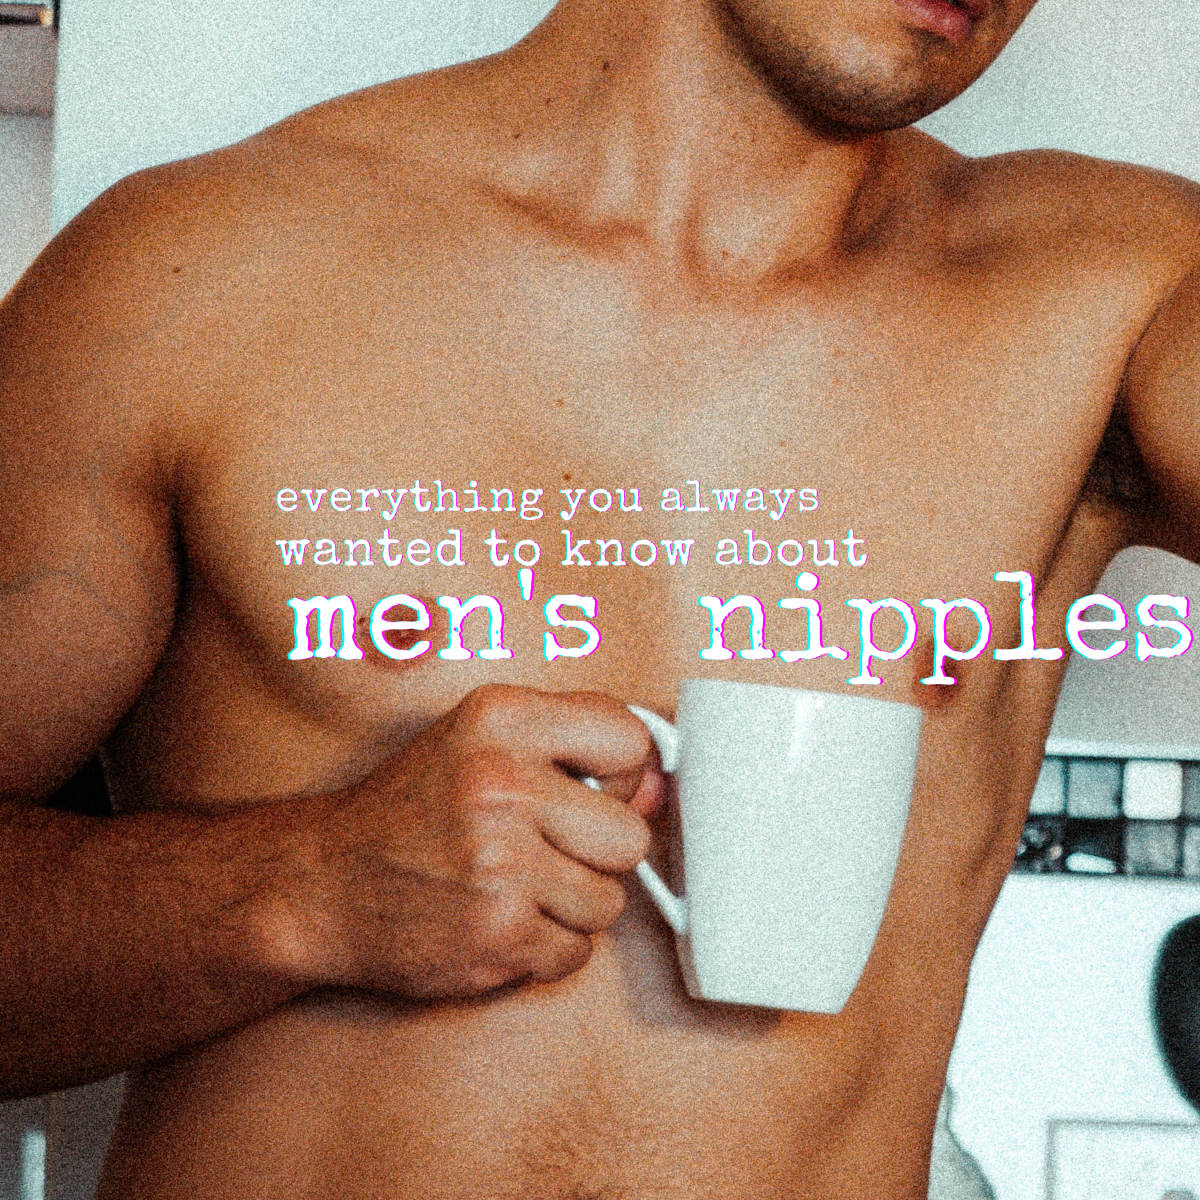 Everything you want to know about manly nipples and were afraid to ask. 